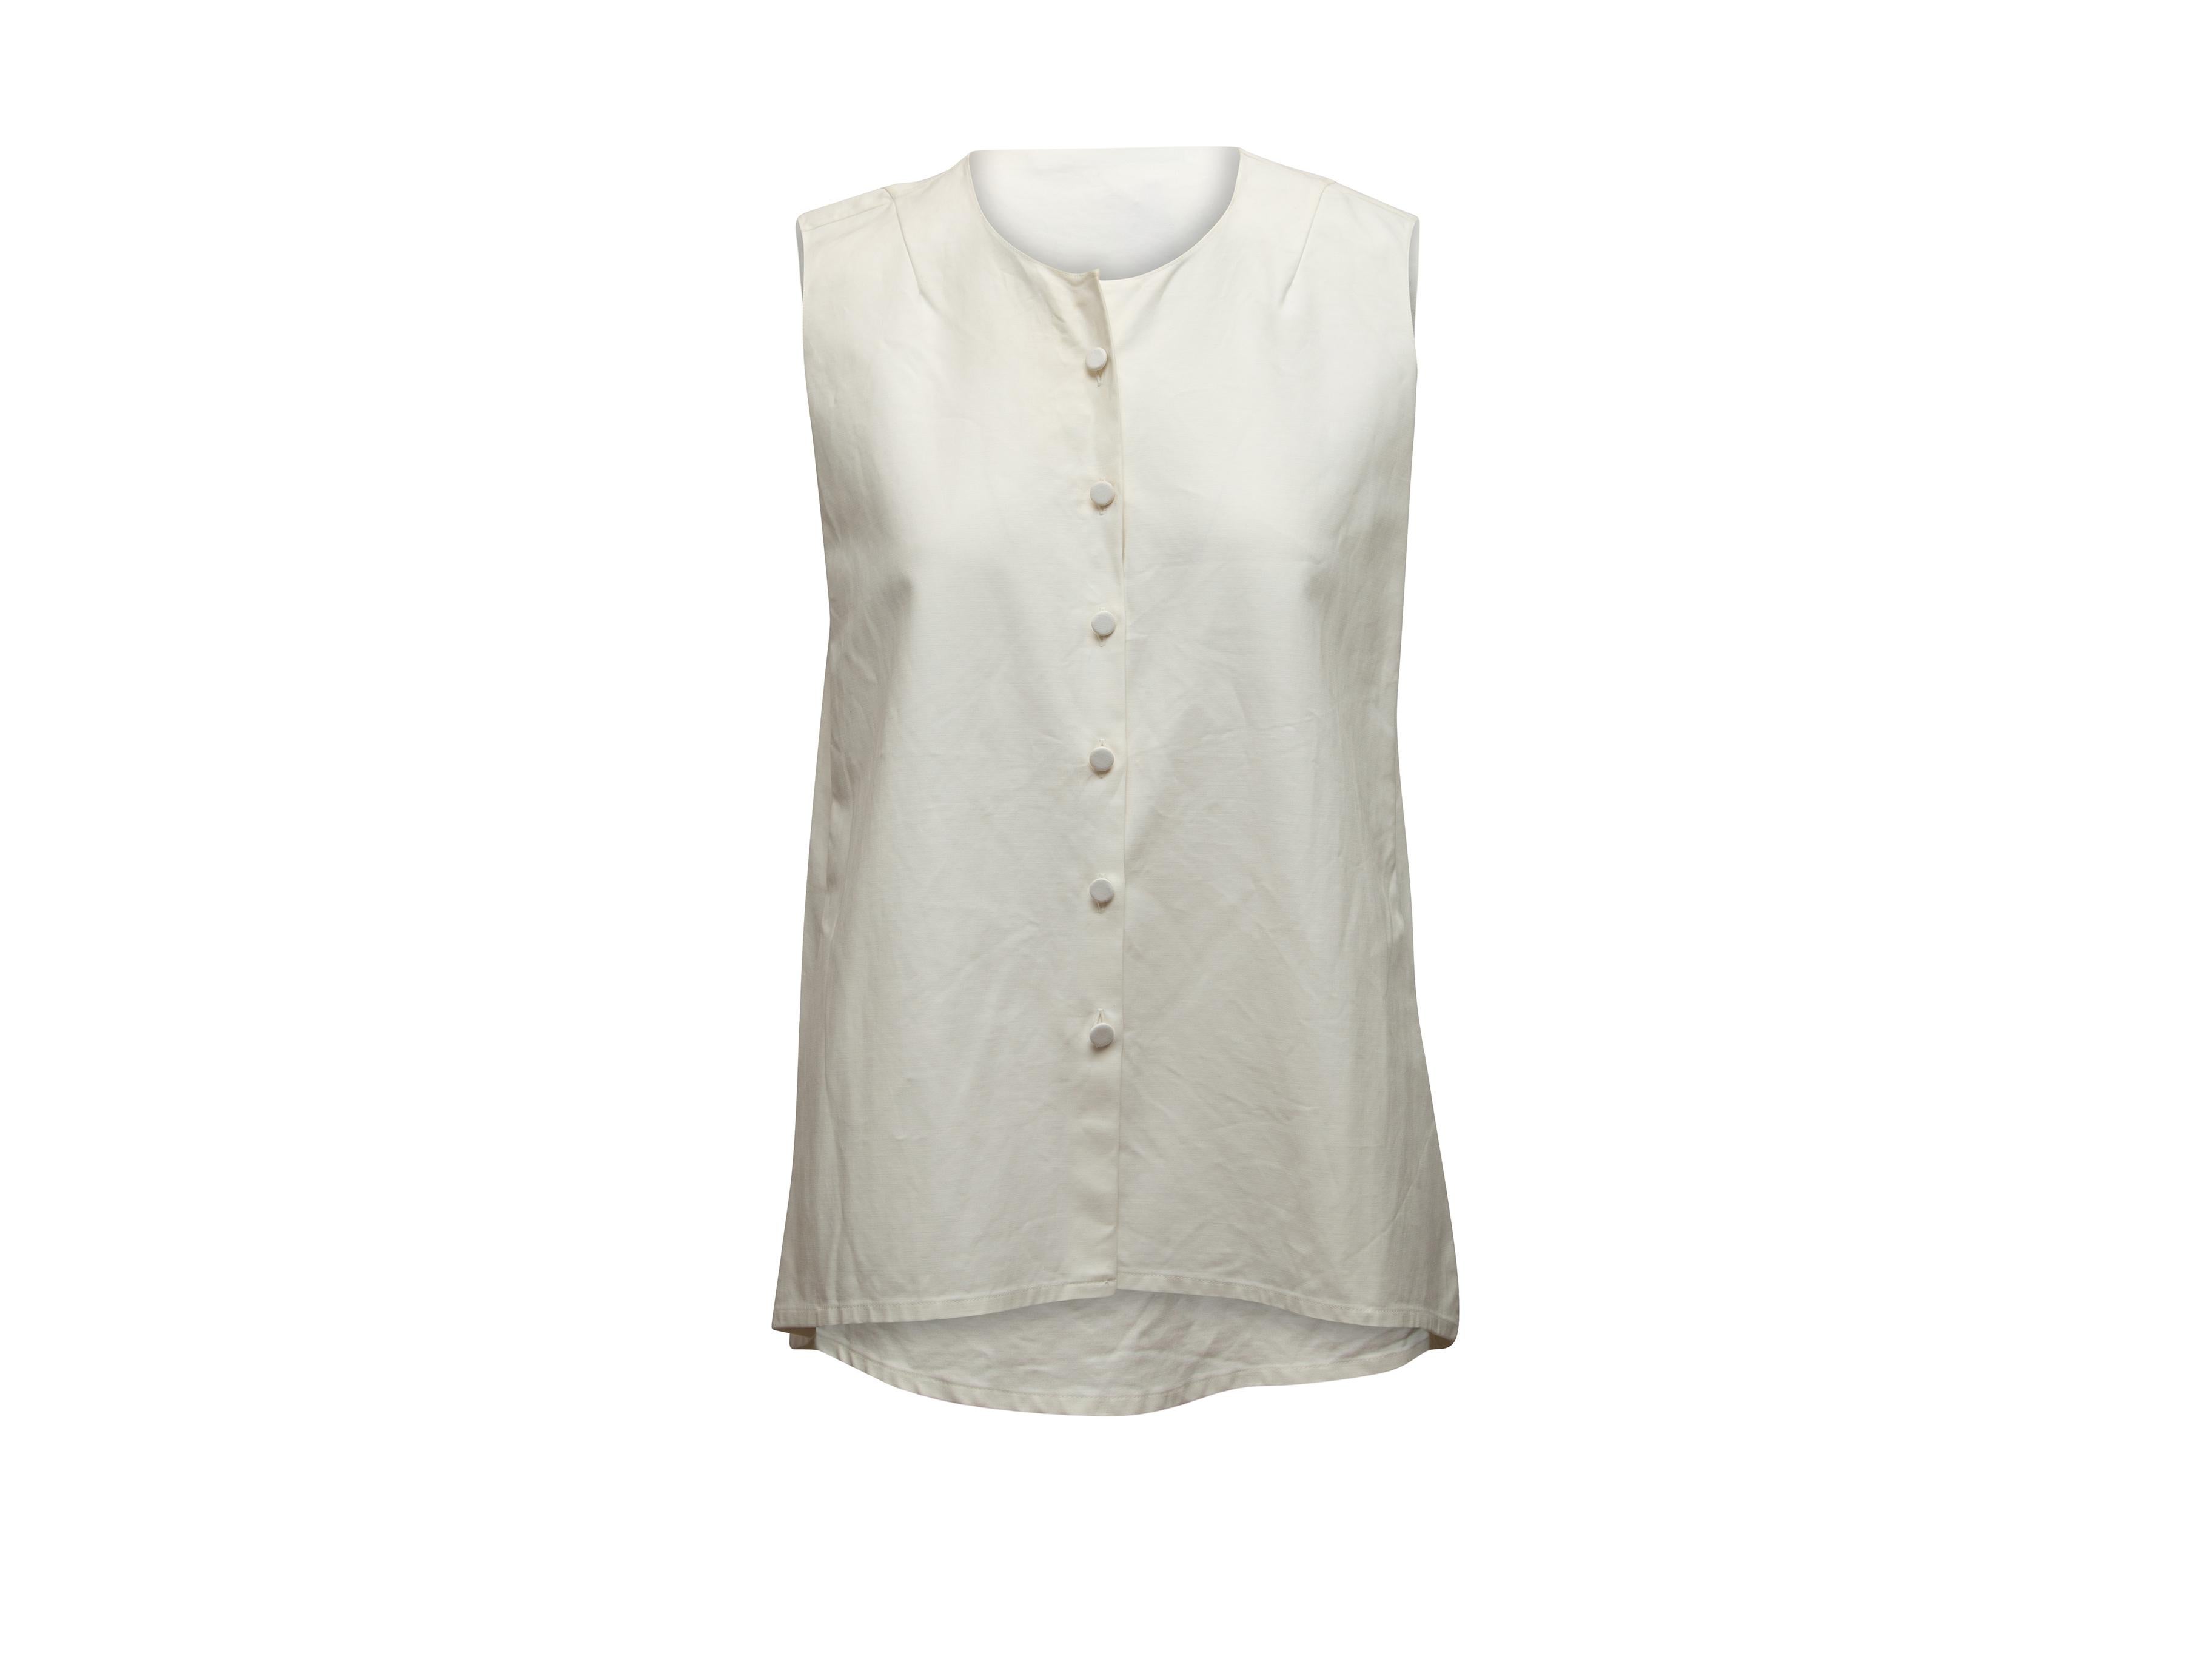 Product details: White sleeveless button-up top by Christian Dior. Crew neck. Button closures at center front. 28